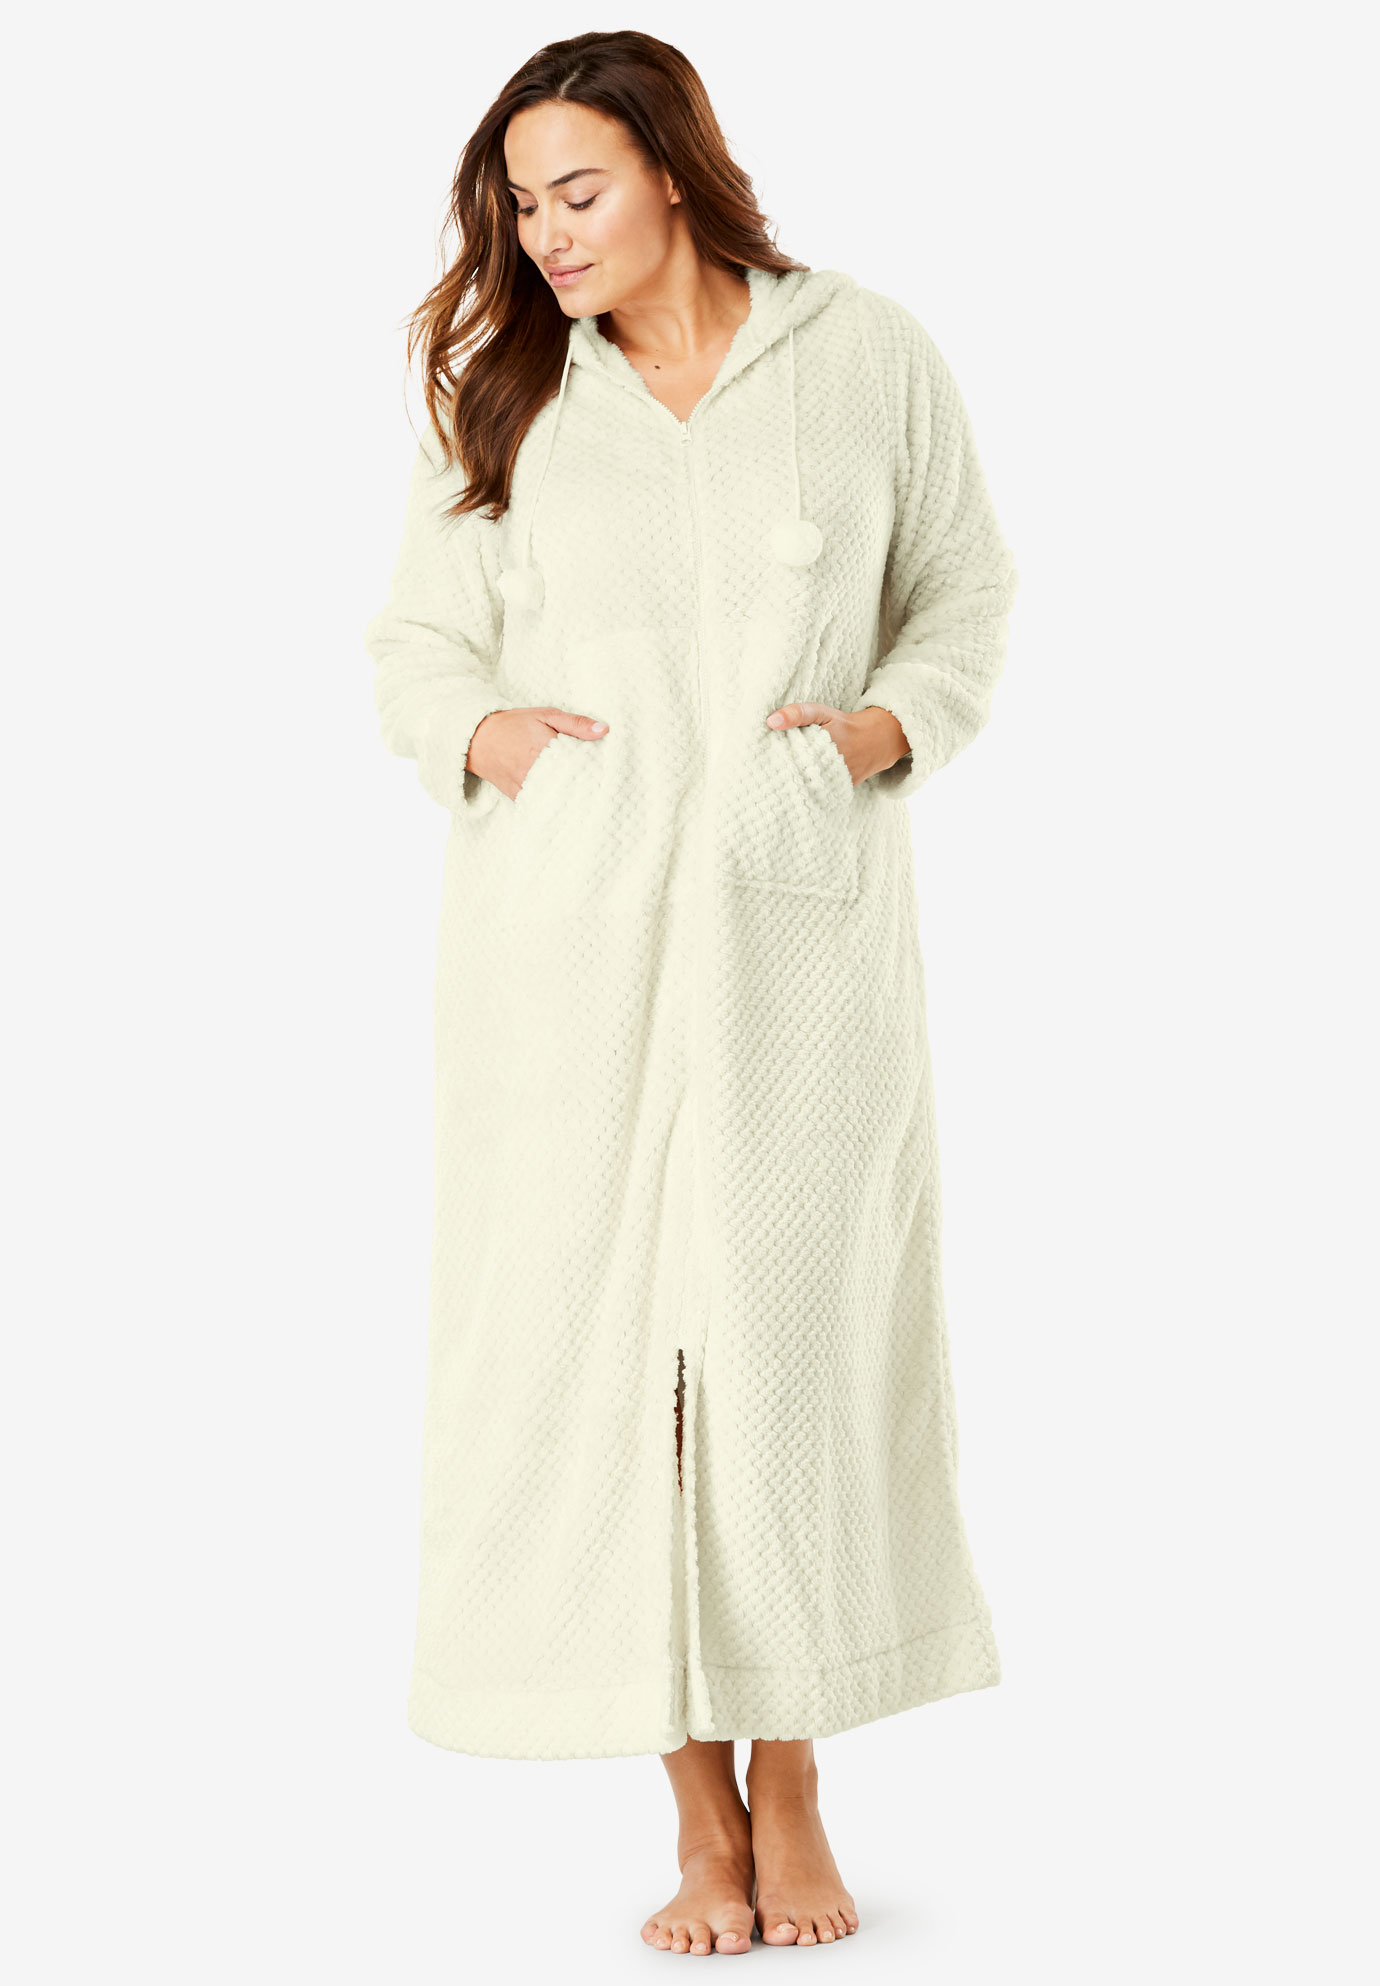 Plush Hooded Long Robe by Dreams & Co.® | Plus Size Robes & Slippers | Woman Within